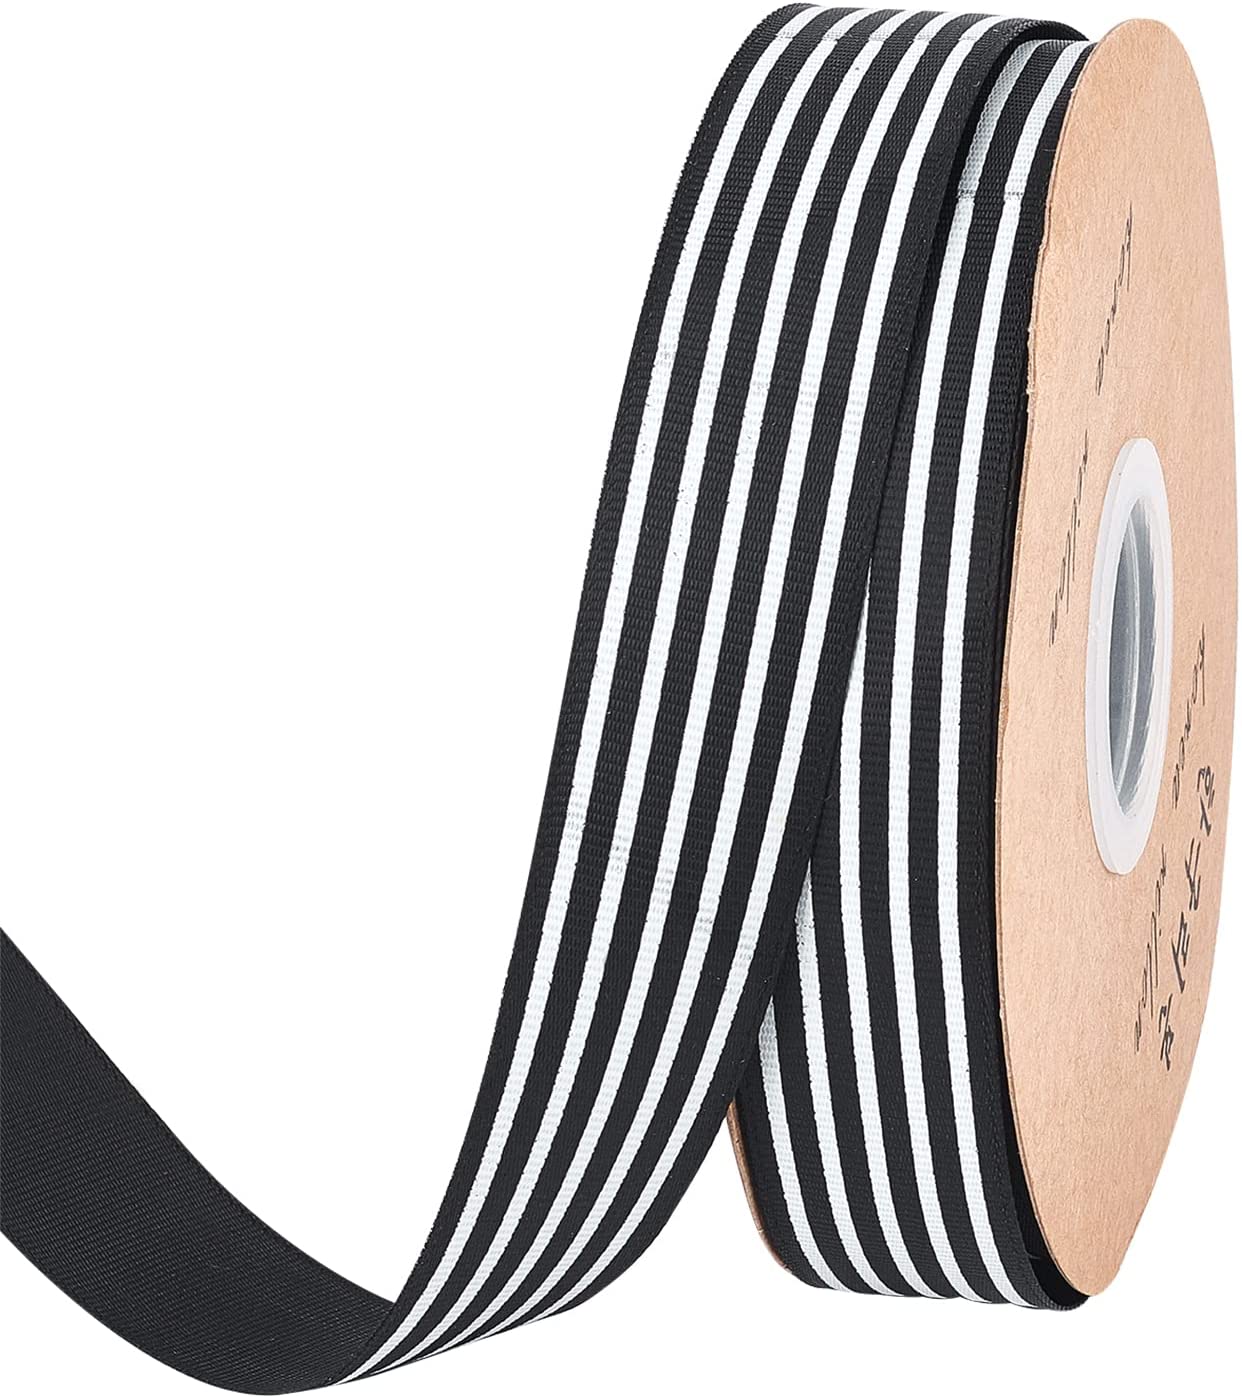 CRASPIRE 50 Yards Striped Ribbon Black and White Striped Grosgrain Ribbon 1  Inch Craft Wrapping Striped Ribbons Roll for Christmas Wraps Embellishments  Party Decoration Gift Packing